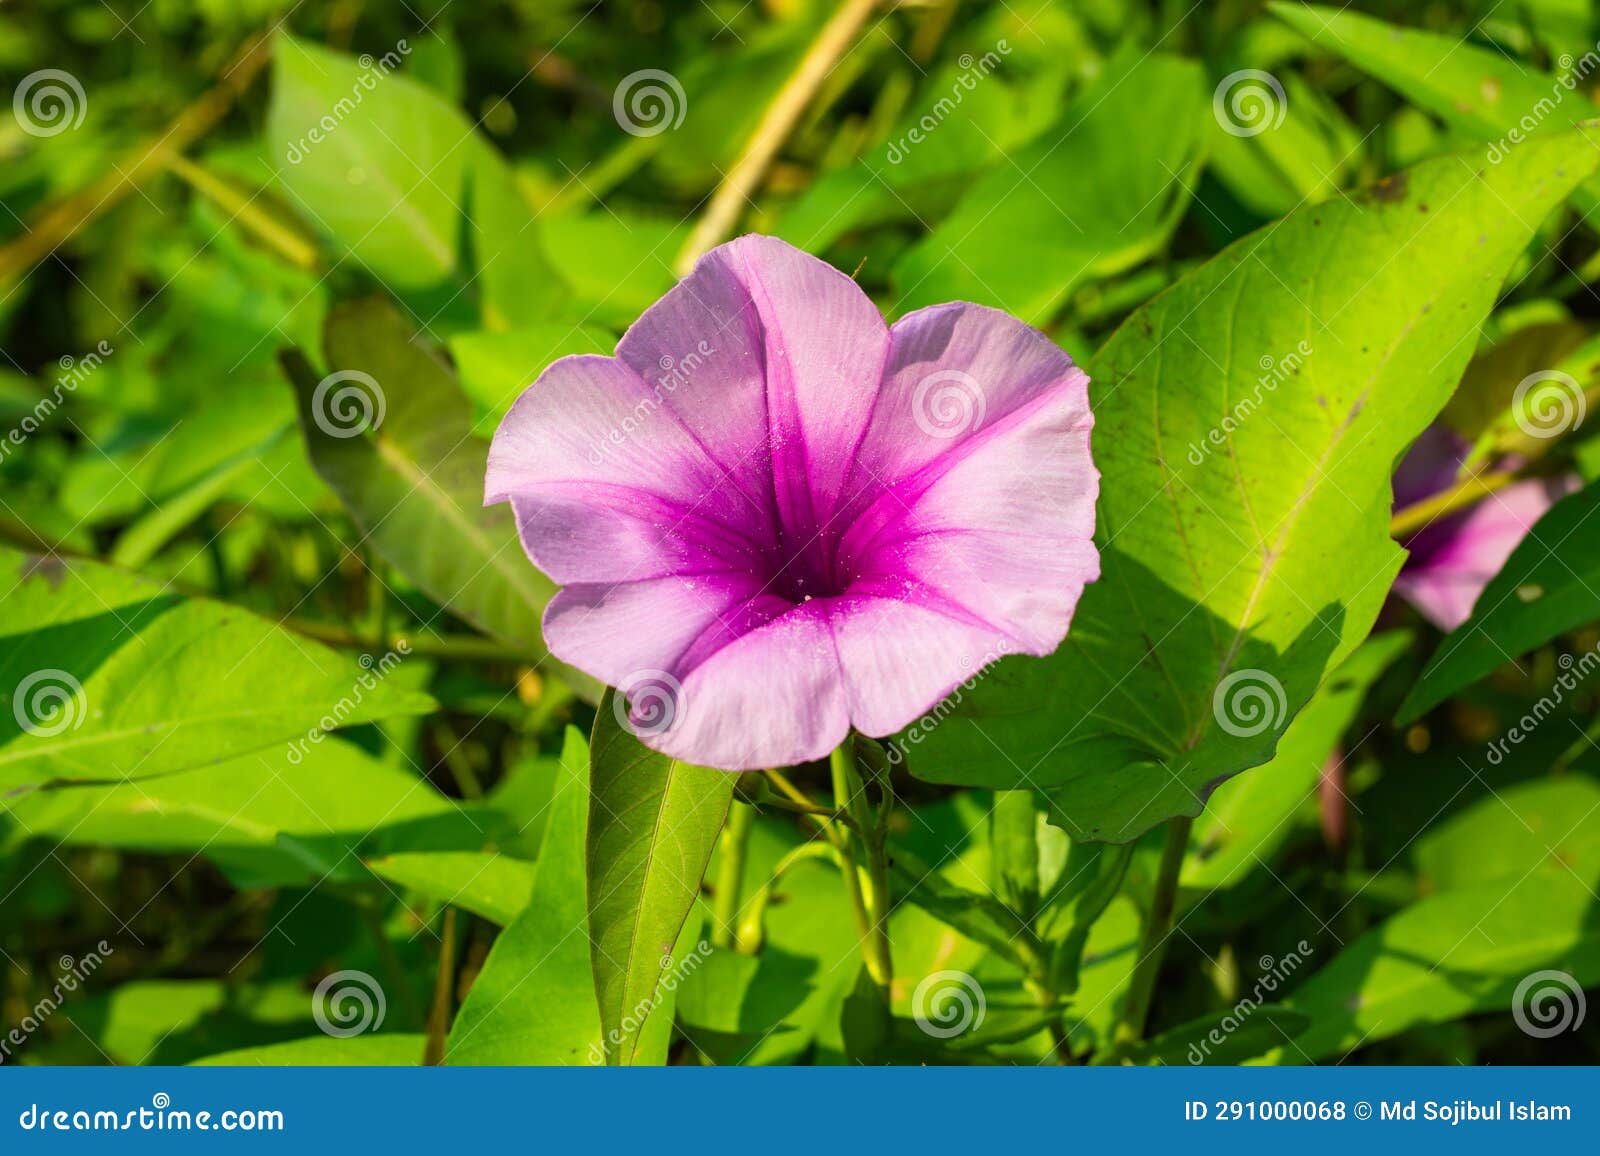 bejuco-de-puerco, chinese water spinach, violet and pink, white color flower